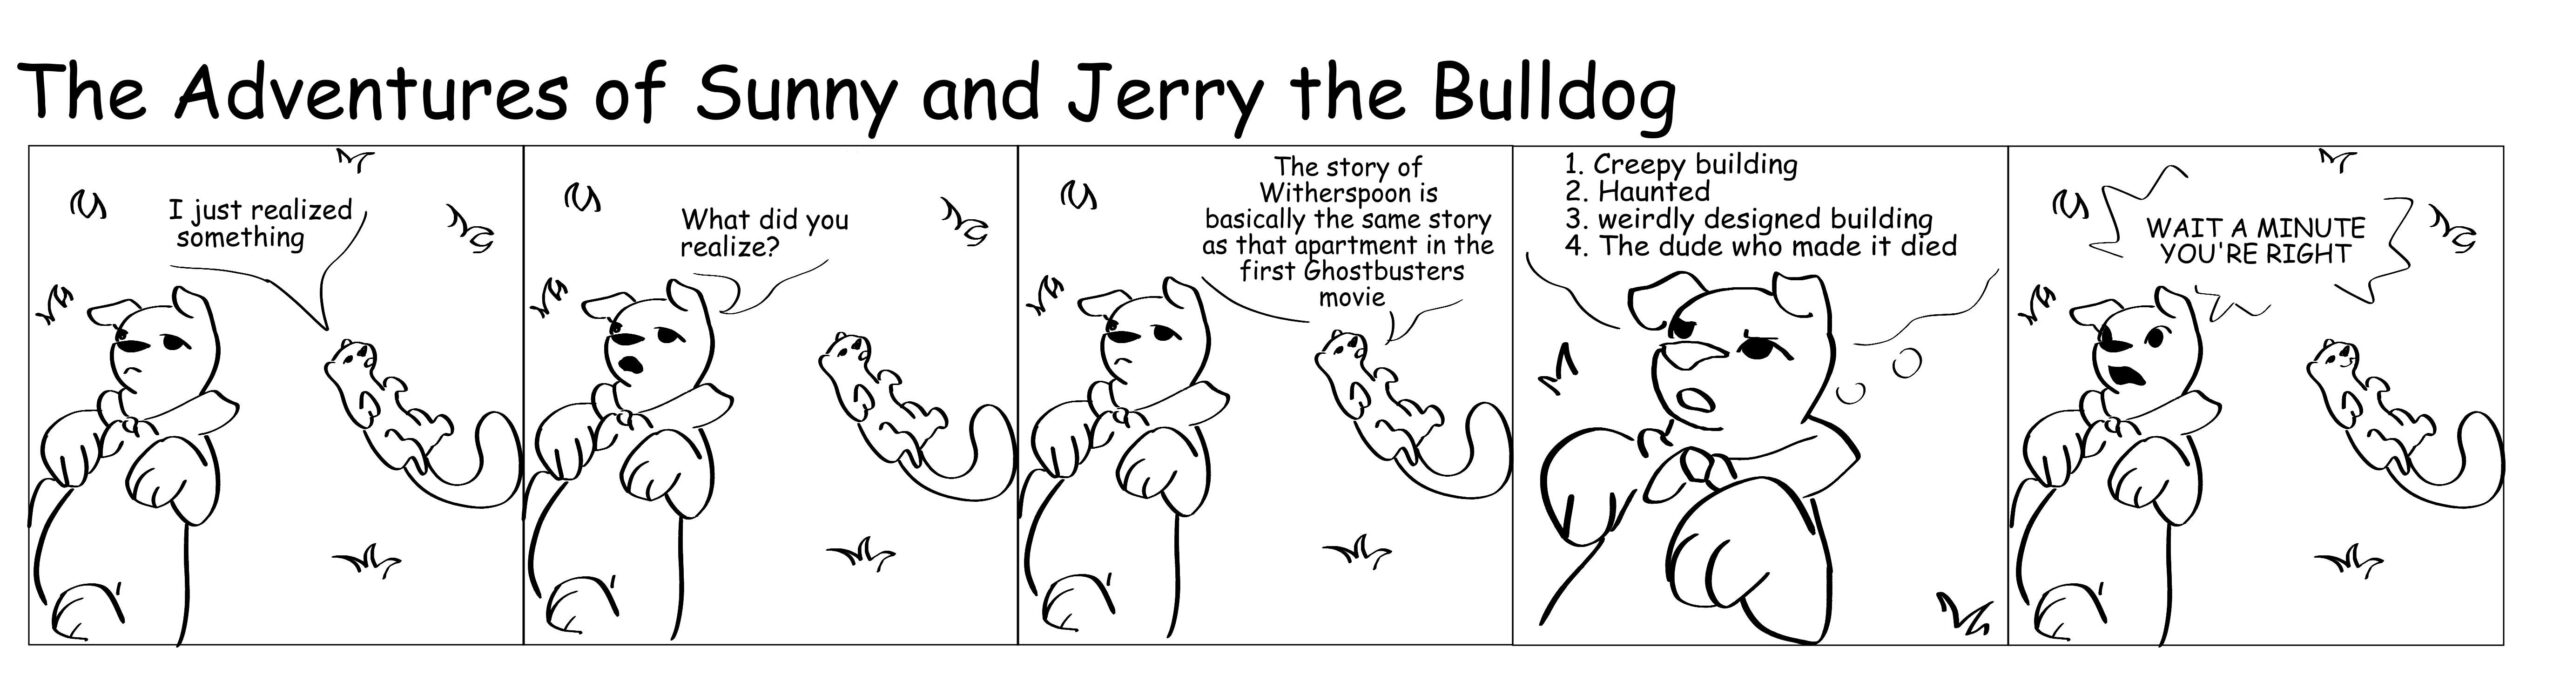 Adventures of Sunny and Jerry the Bulldog 10/27/2022